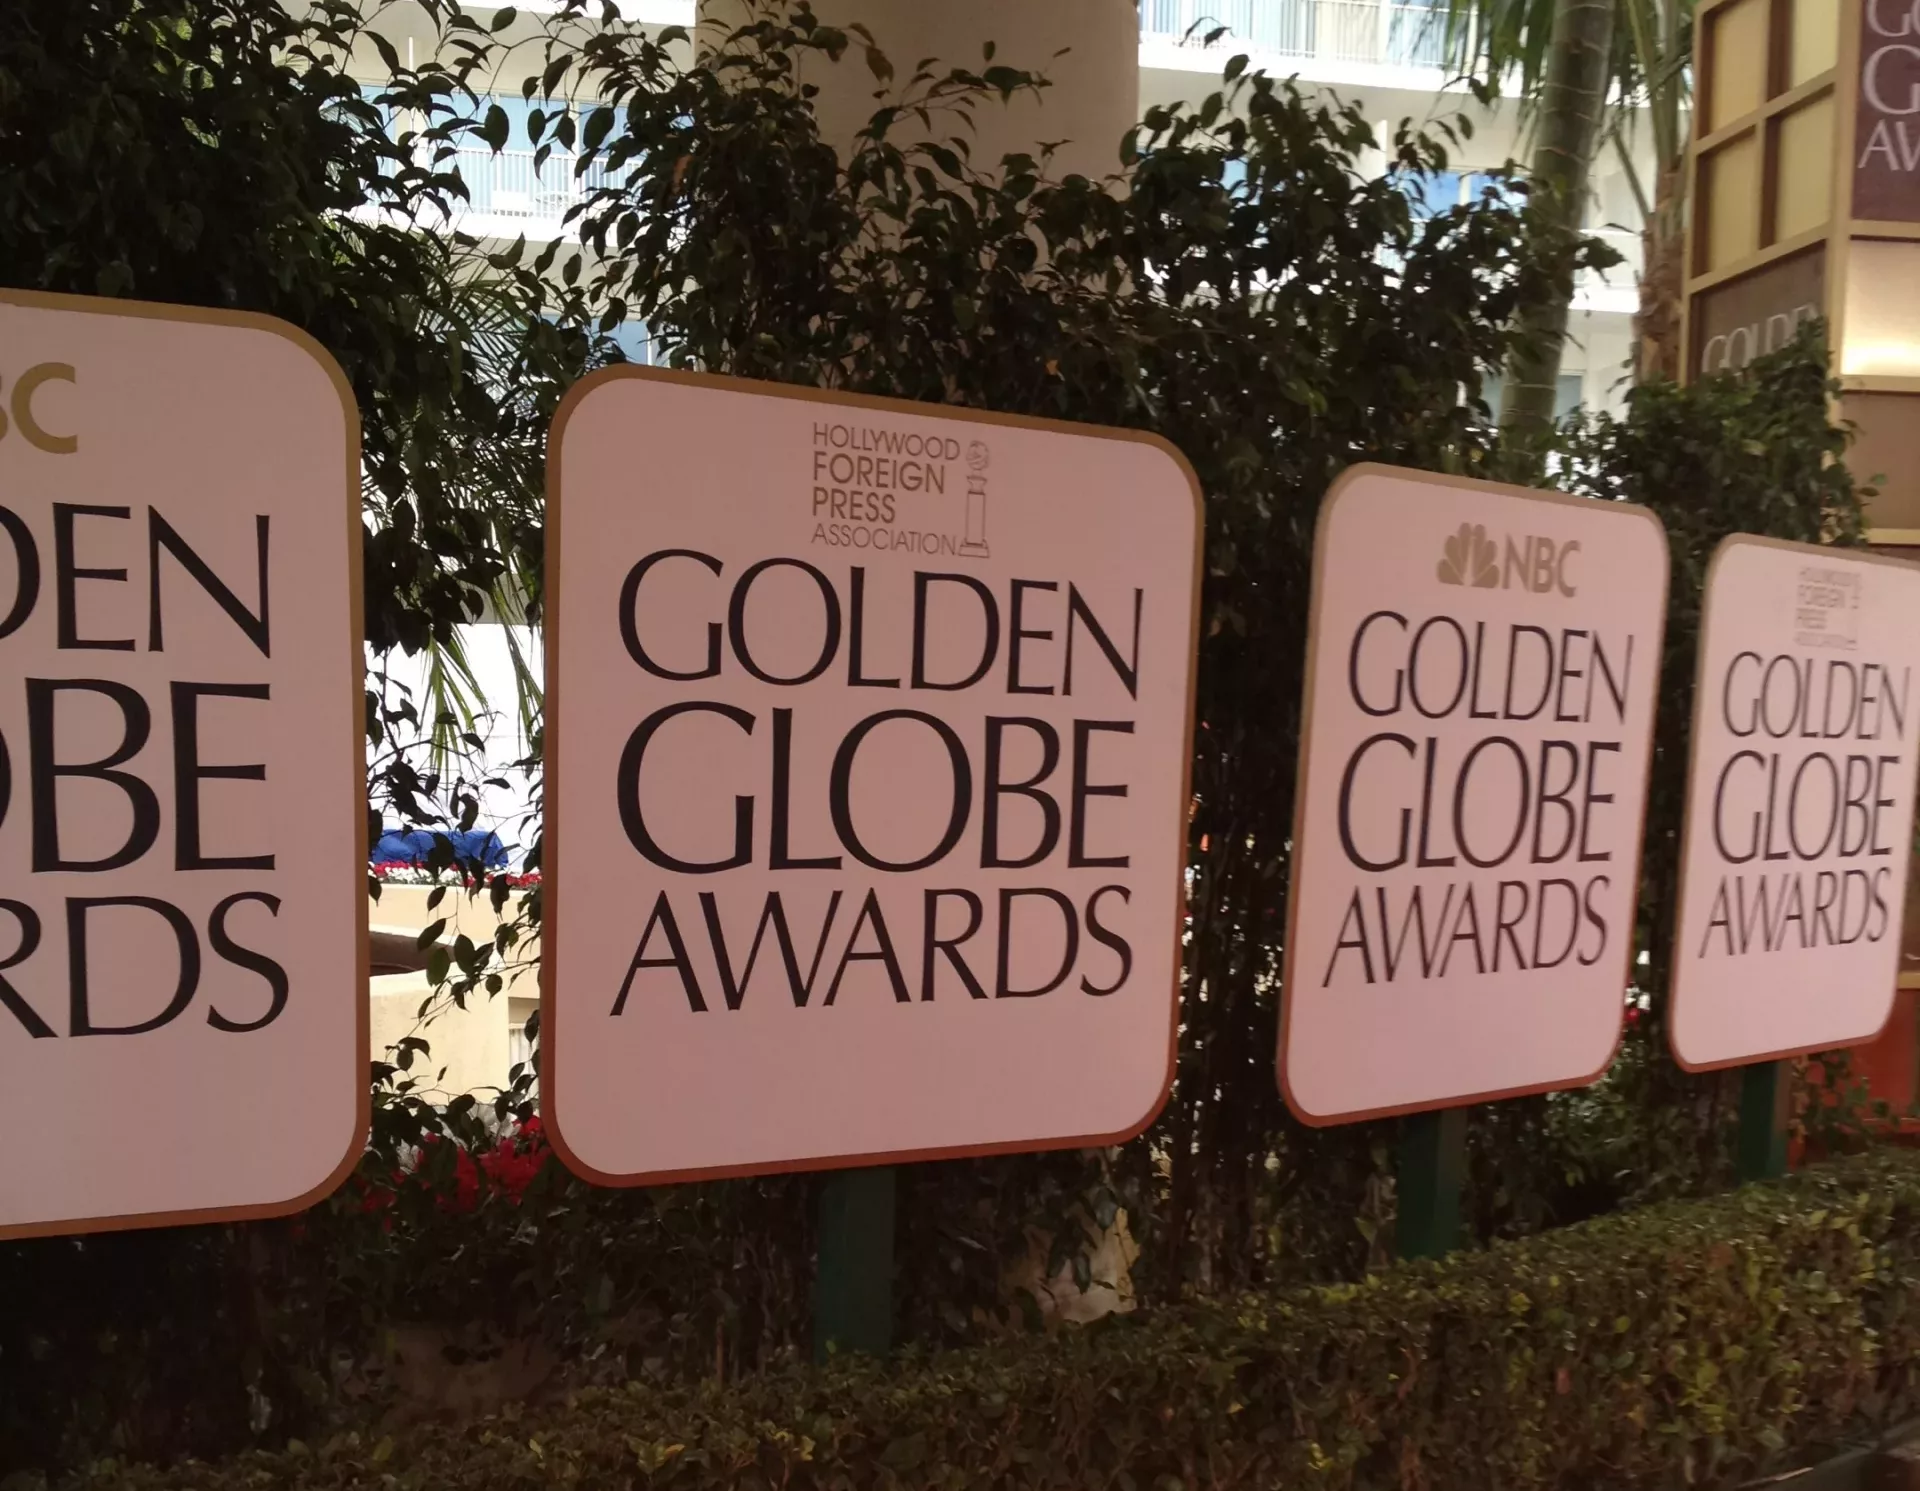 Golden Globes in Review: From Upsets to Obvious Winners